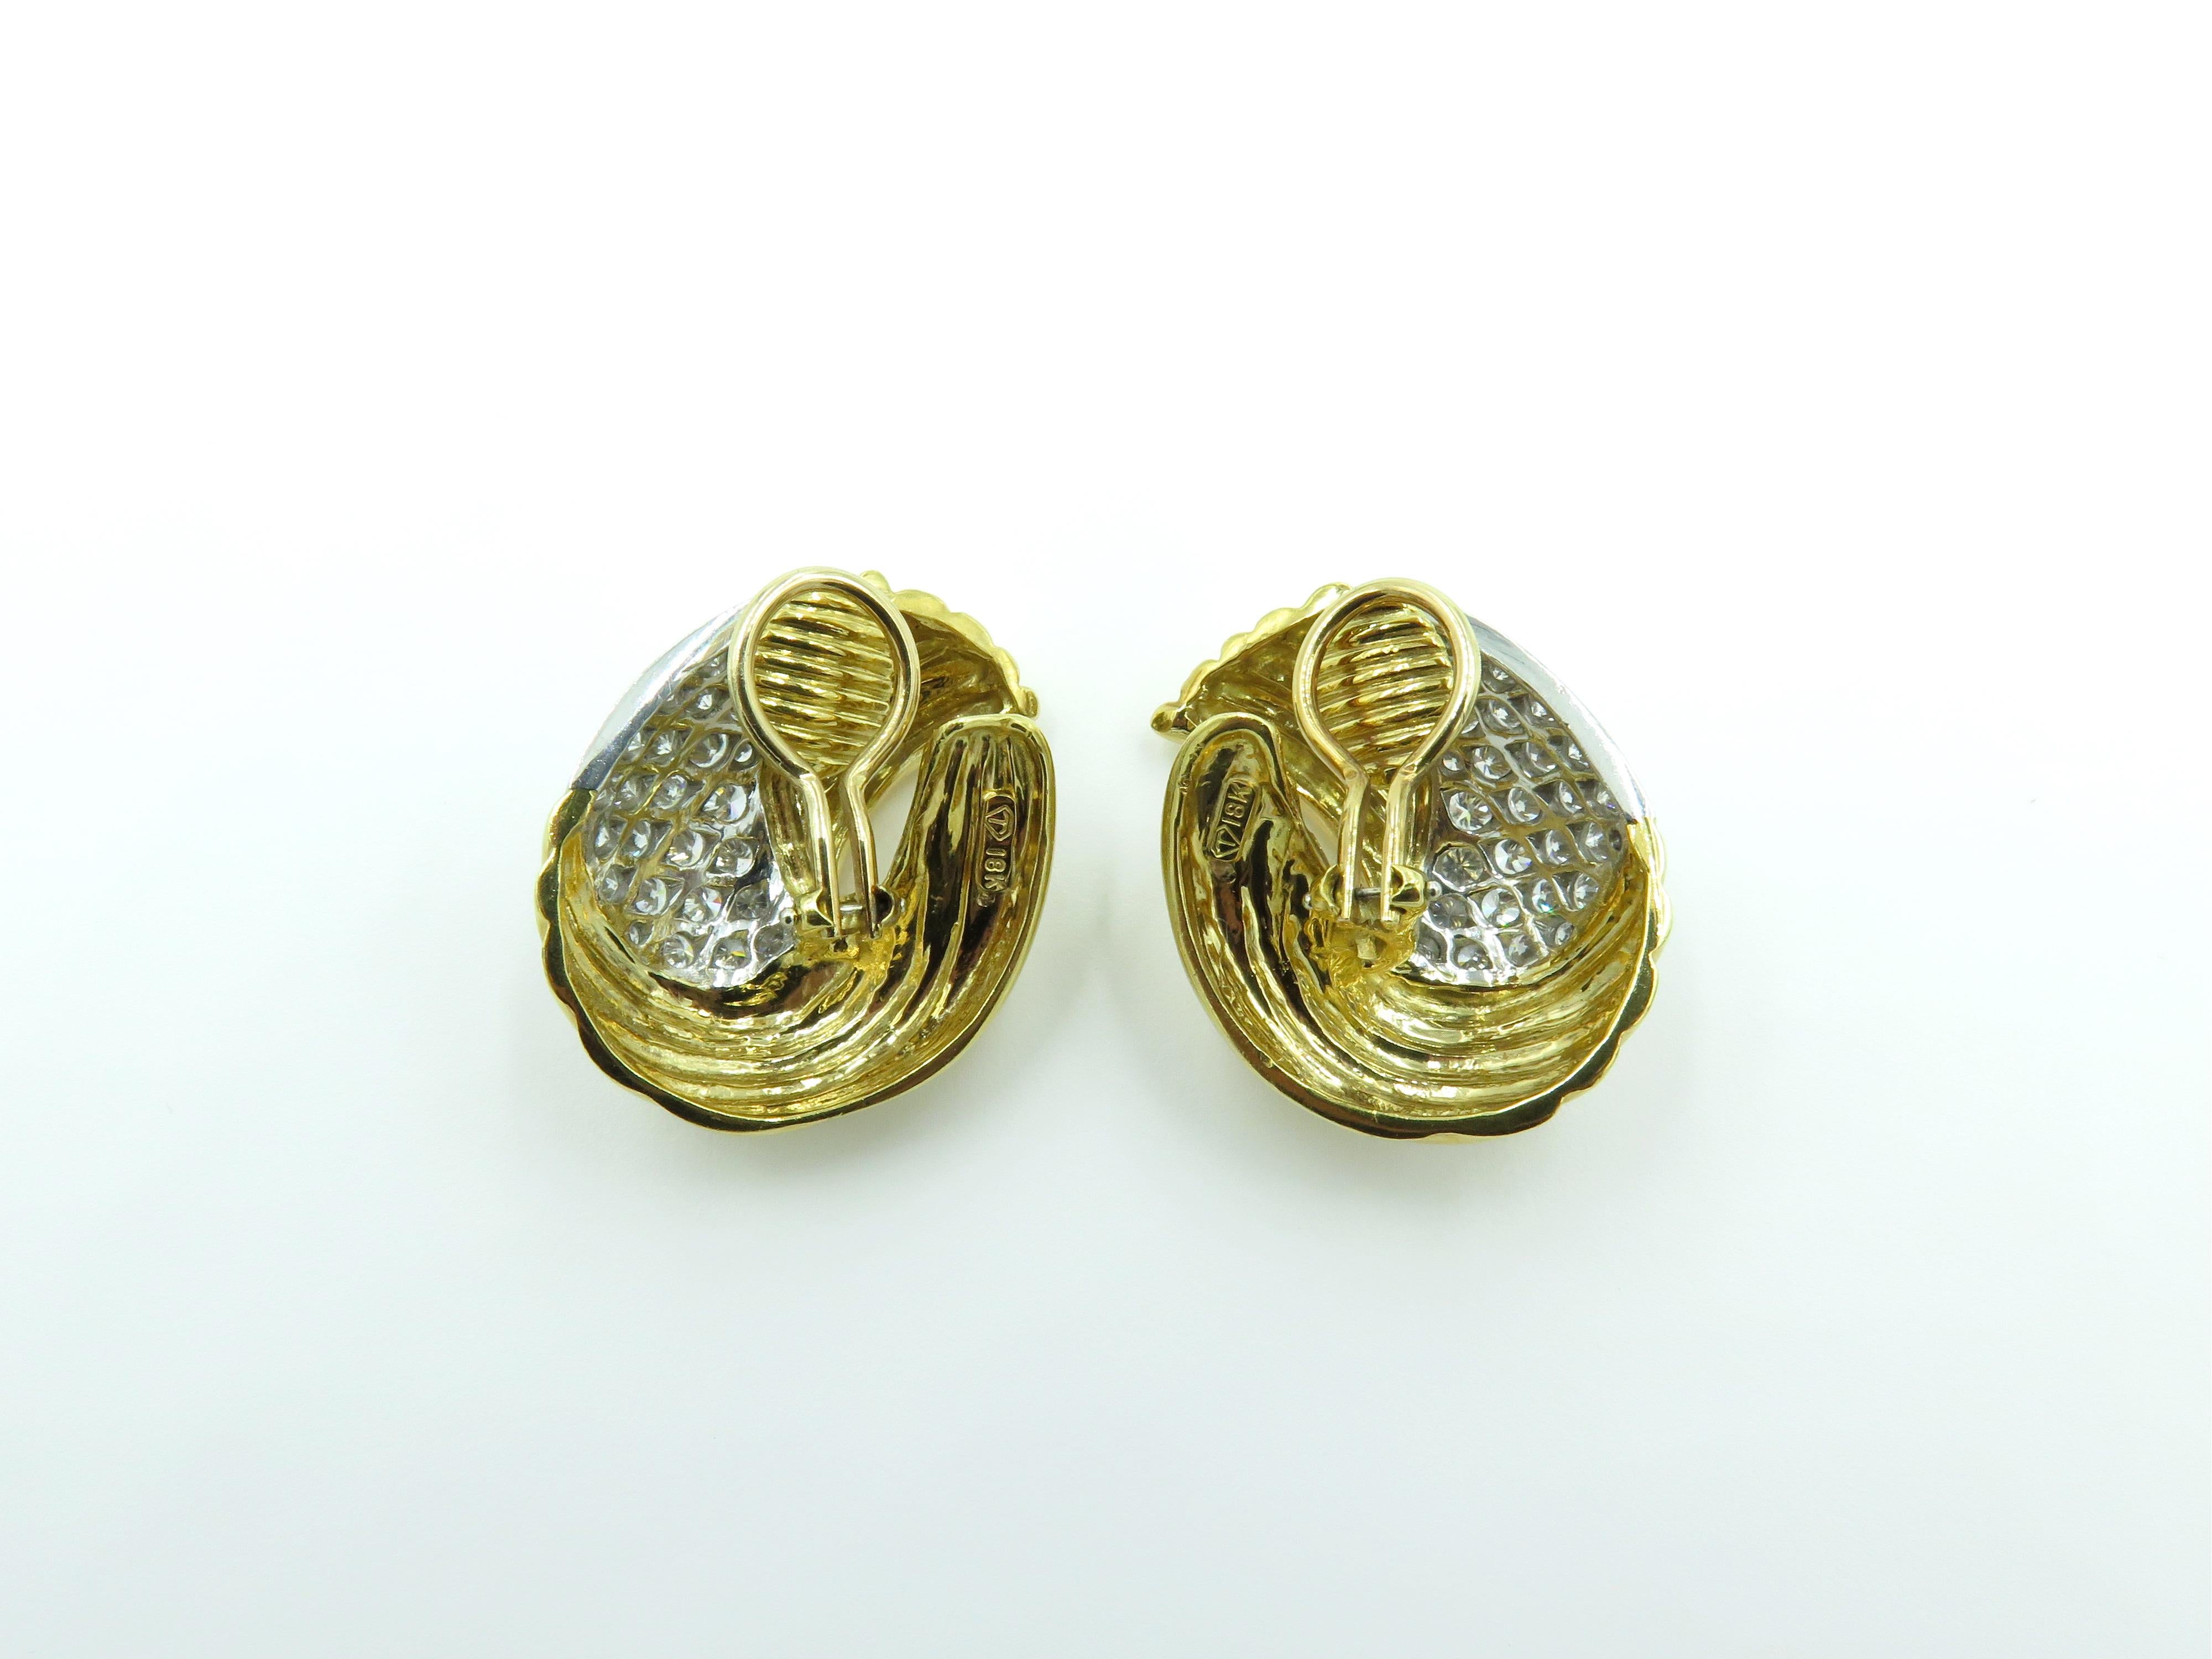 A pair of 18 art yellow gold and diamond earrings. Circa 1970. Each designed as a fluted gold spray, enhanced by pave set diamonds.  Fifty six (56) diamonds weigh approximately 3.00 carats. Length is approximately 1 1/4 inches. Gross weight is